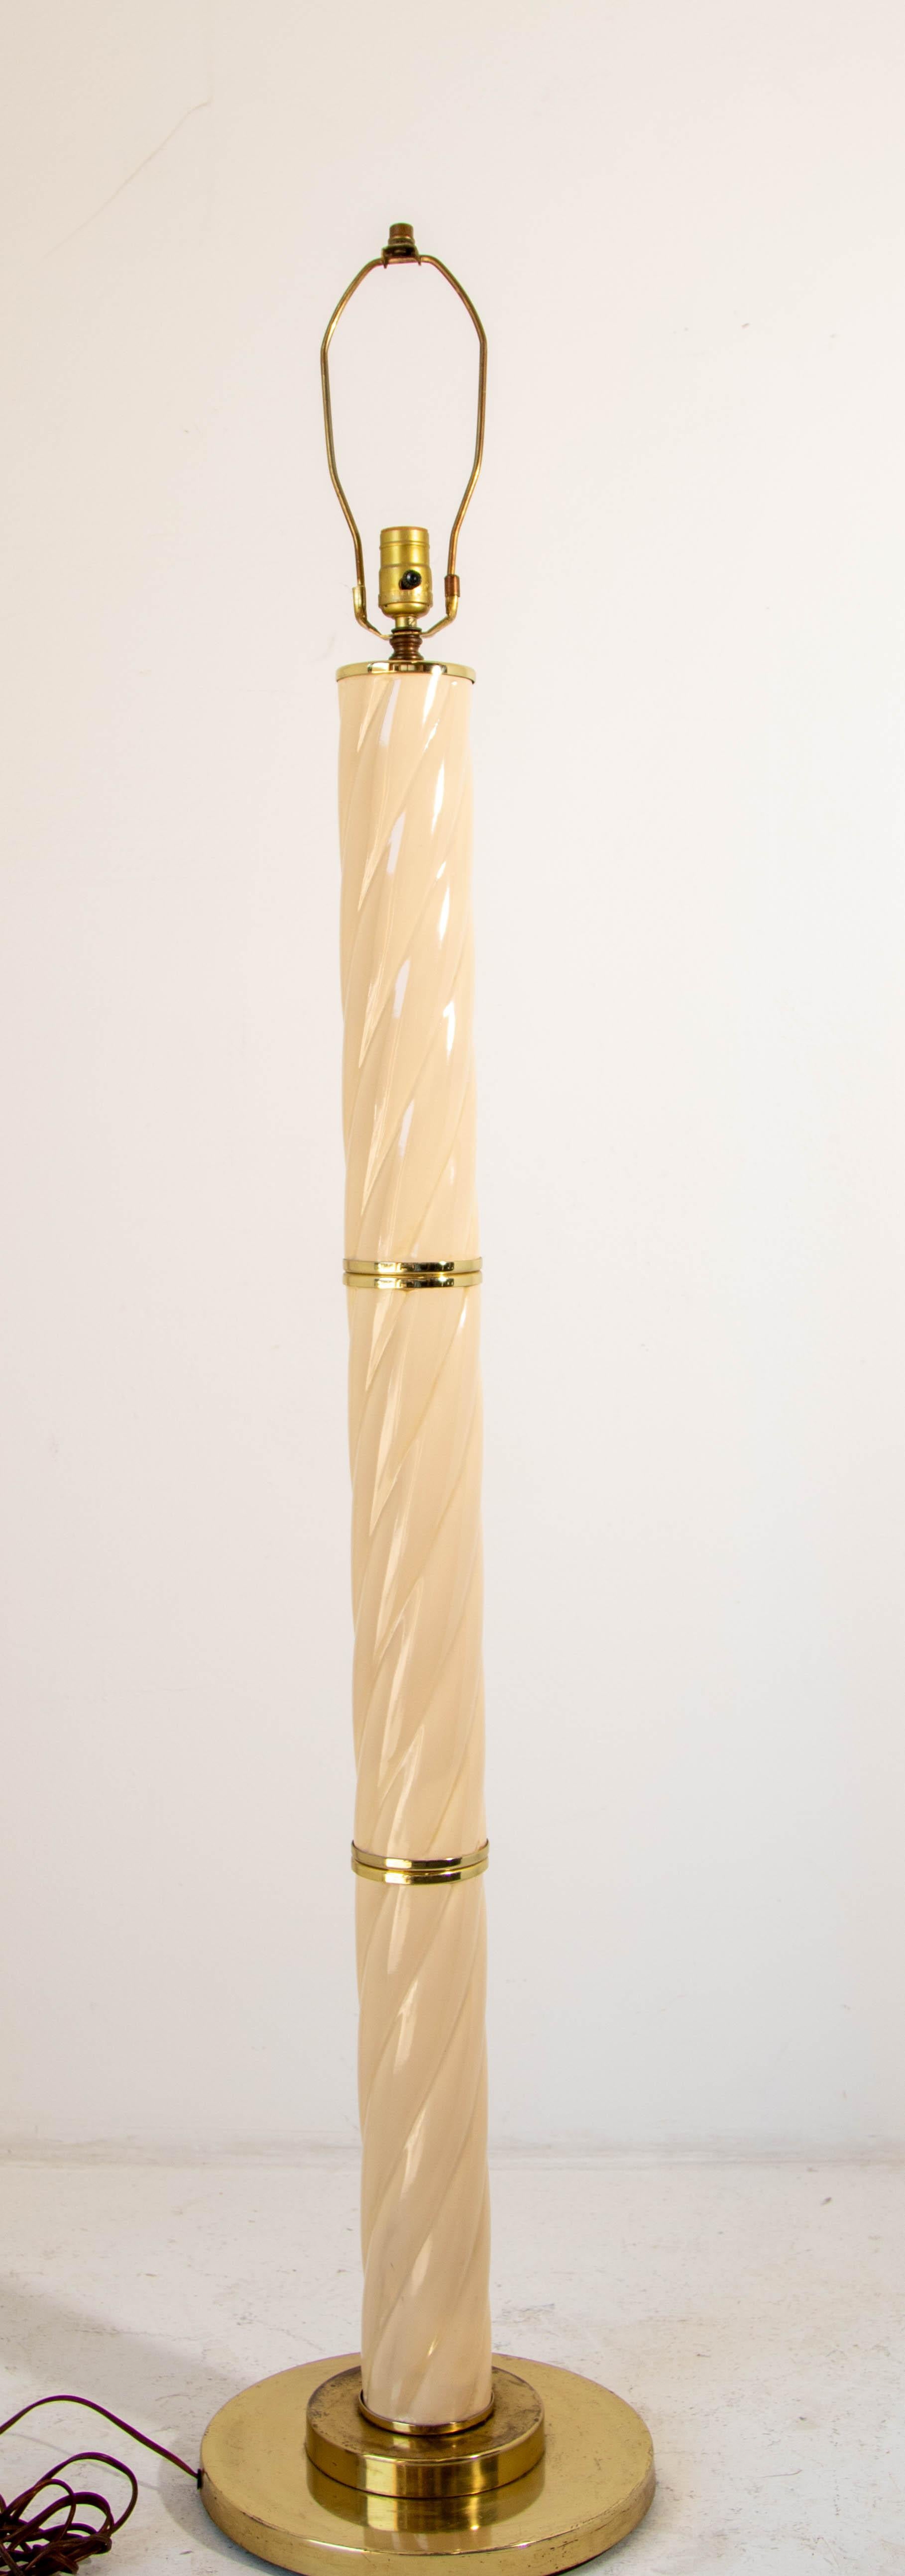 Tomasso Barbi Style Floor Lamp White Ceramic and Brass, 1970s For Sale 3